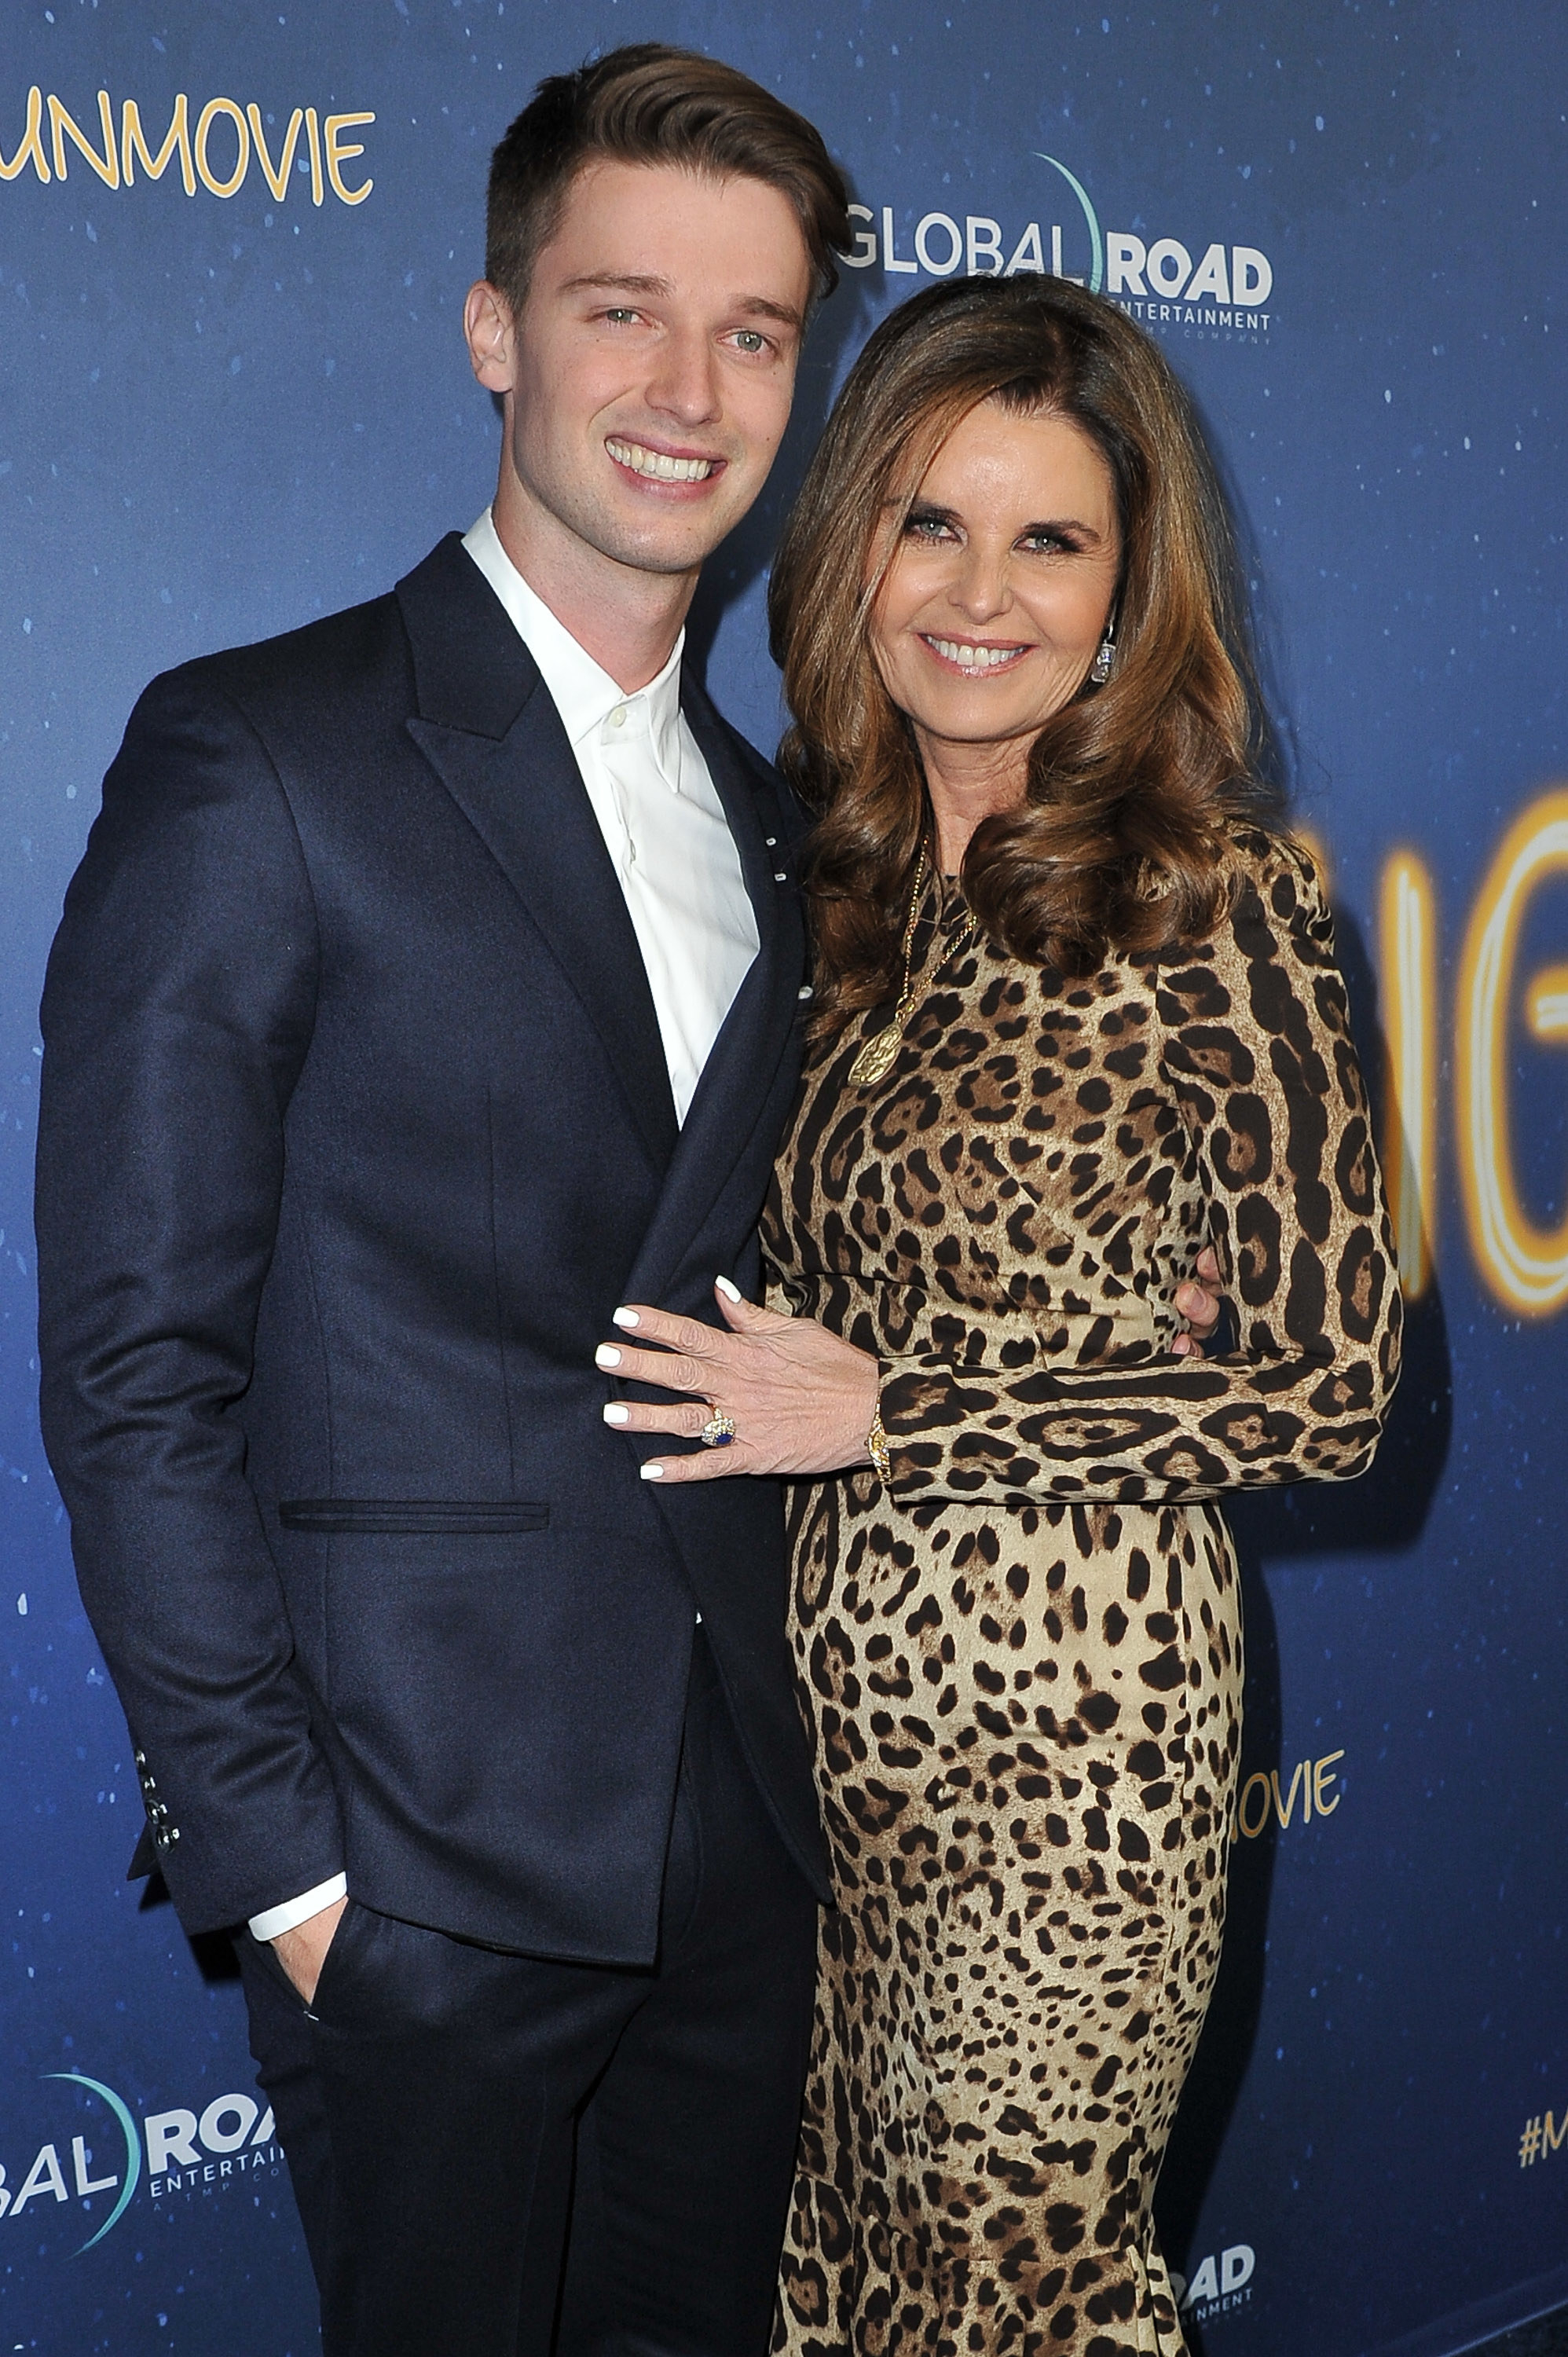 Maria Shriver and Patrick Schwarzenegger pose at the 2018 &quot;Midnight Sun&quot; premiere